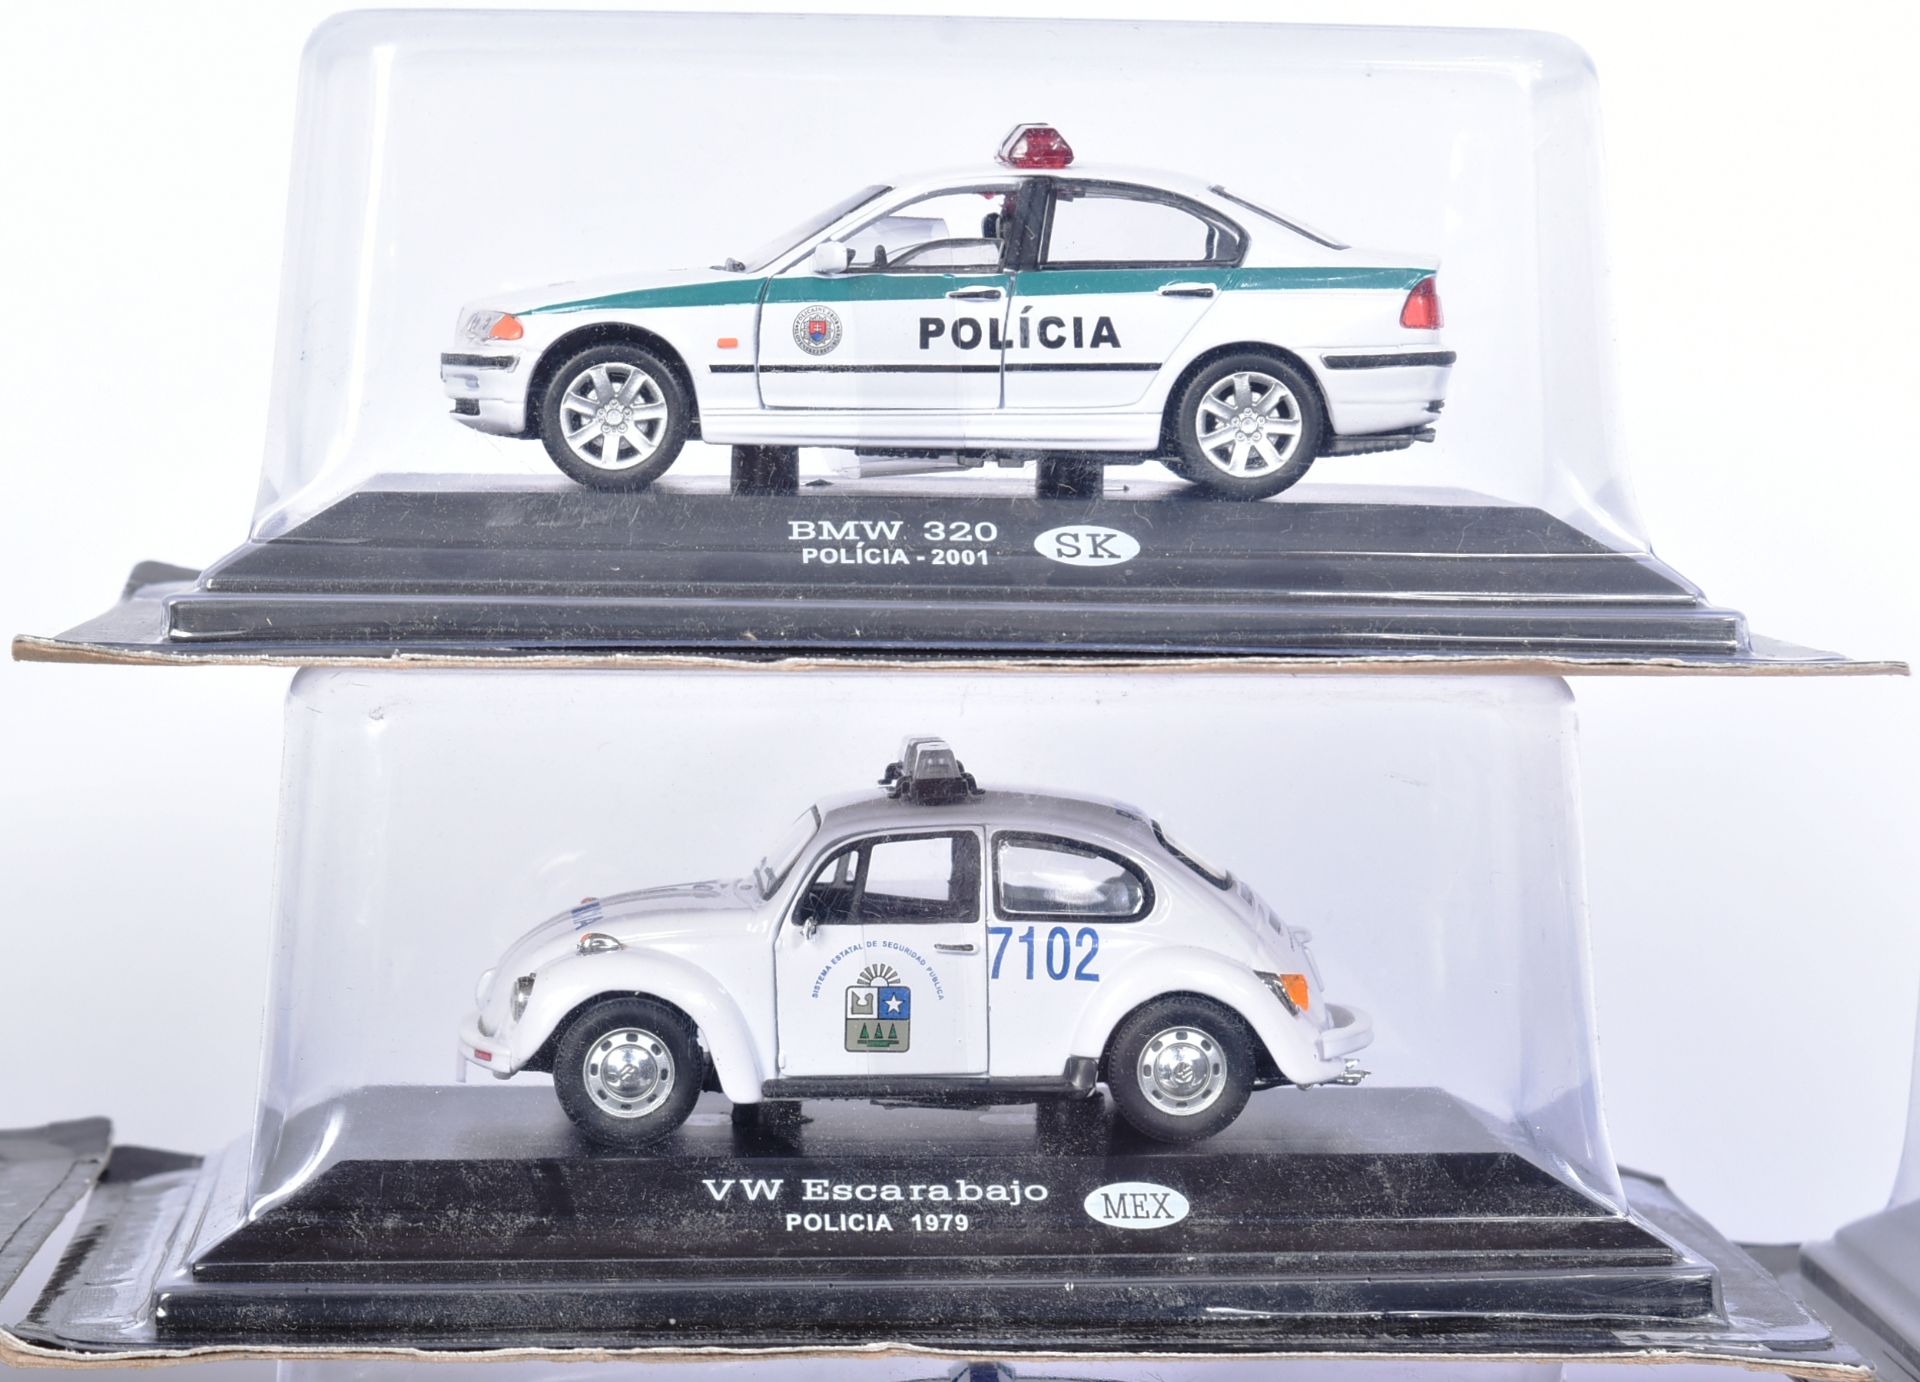 DIECAST - COLLECTION OF 1/43 SCALE DIECAST MODEL POLICE CARS - Image 5 of 5